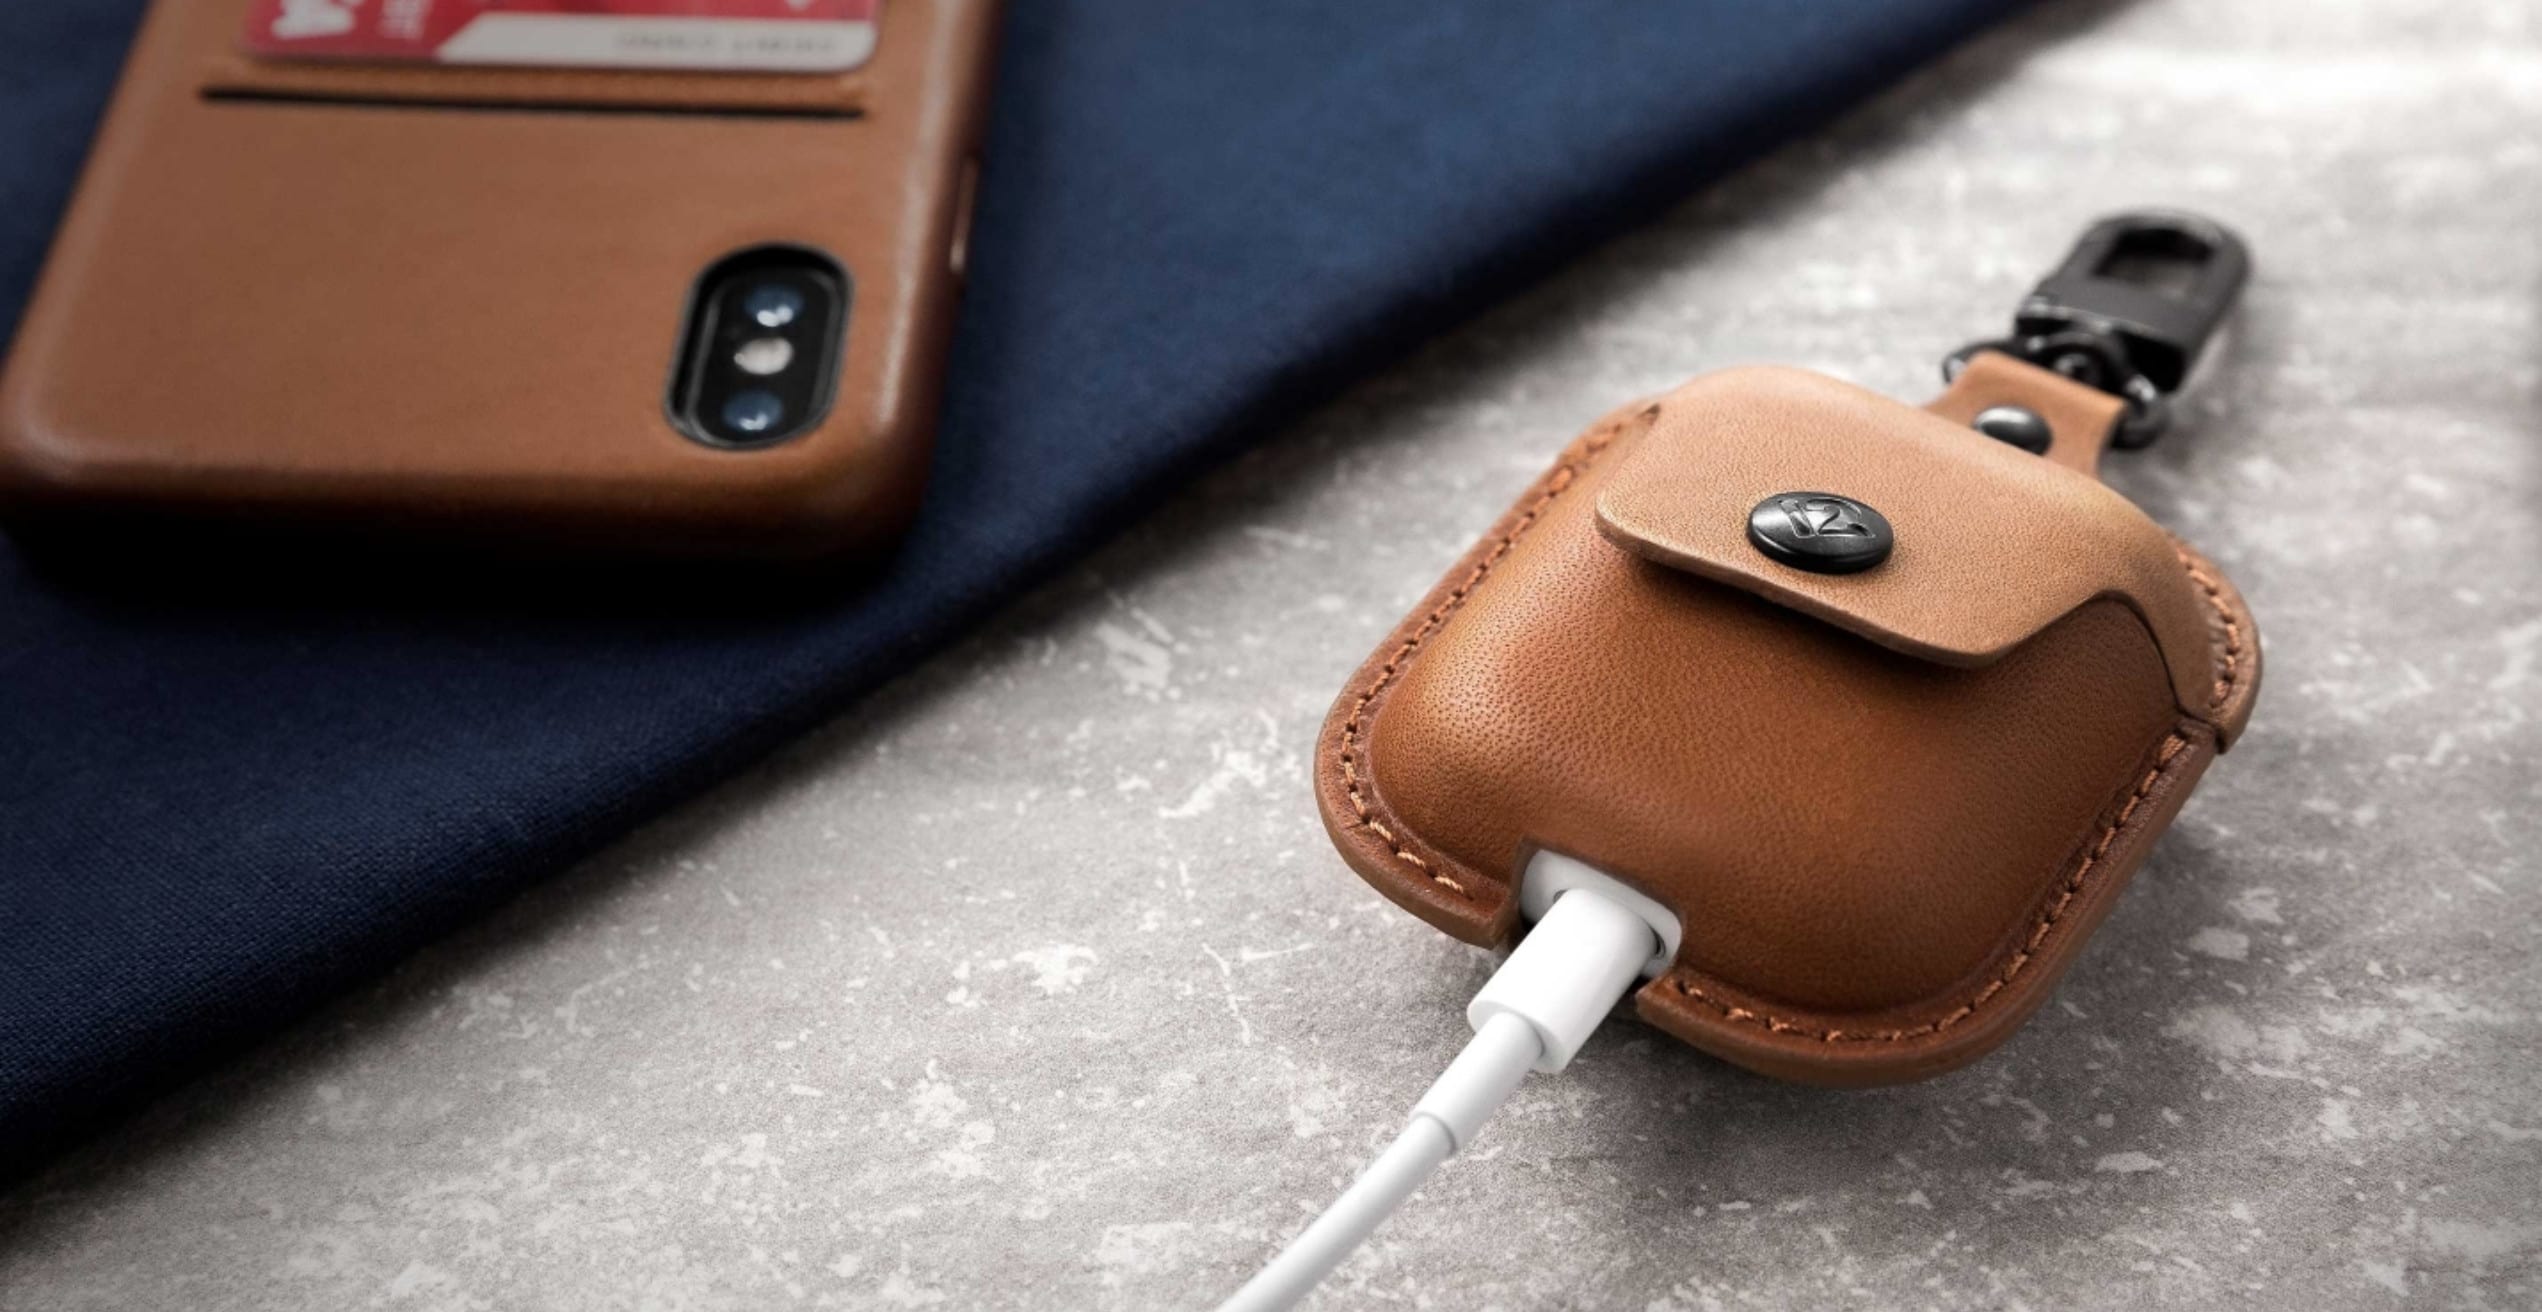 With the handy cutout on the bottom, you can recharge your AirPods without ever taking them out of this chic case.